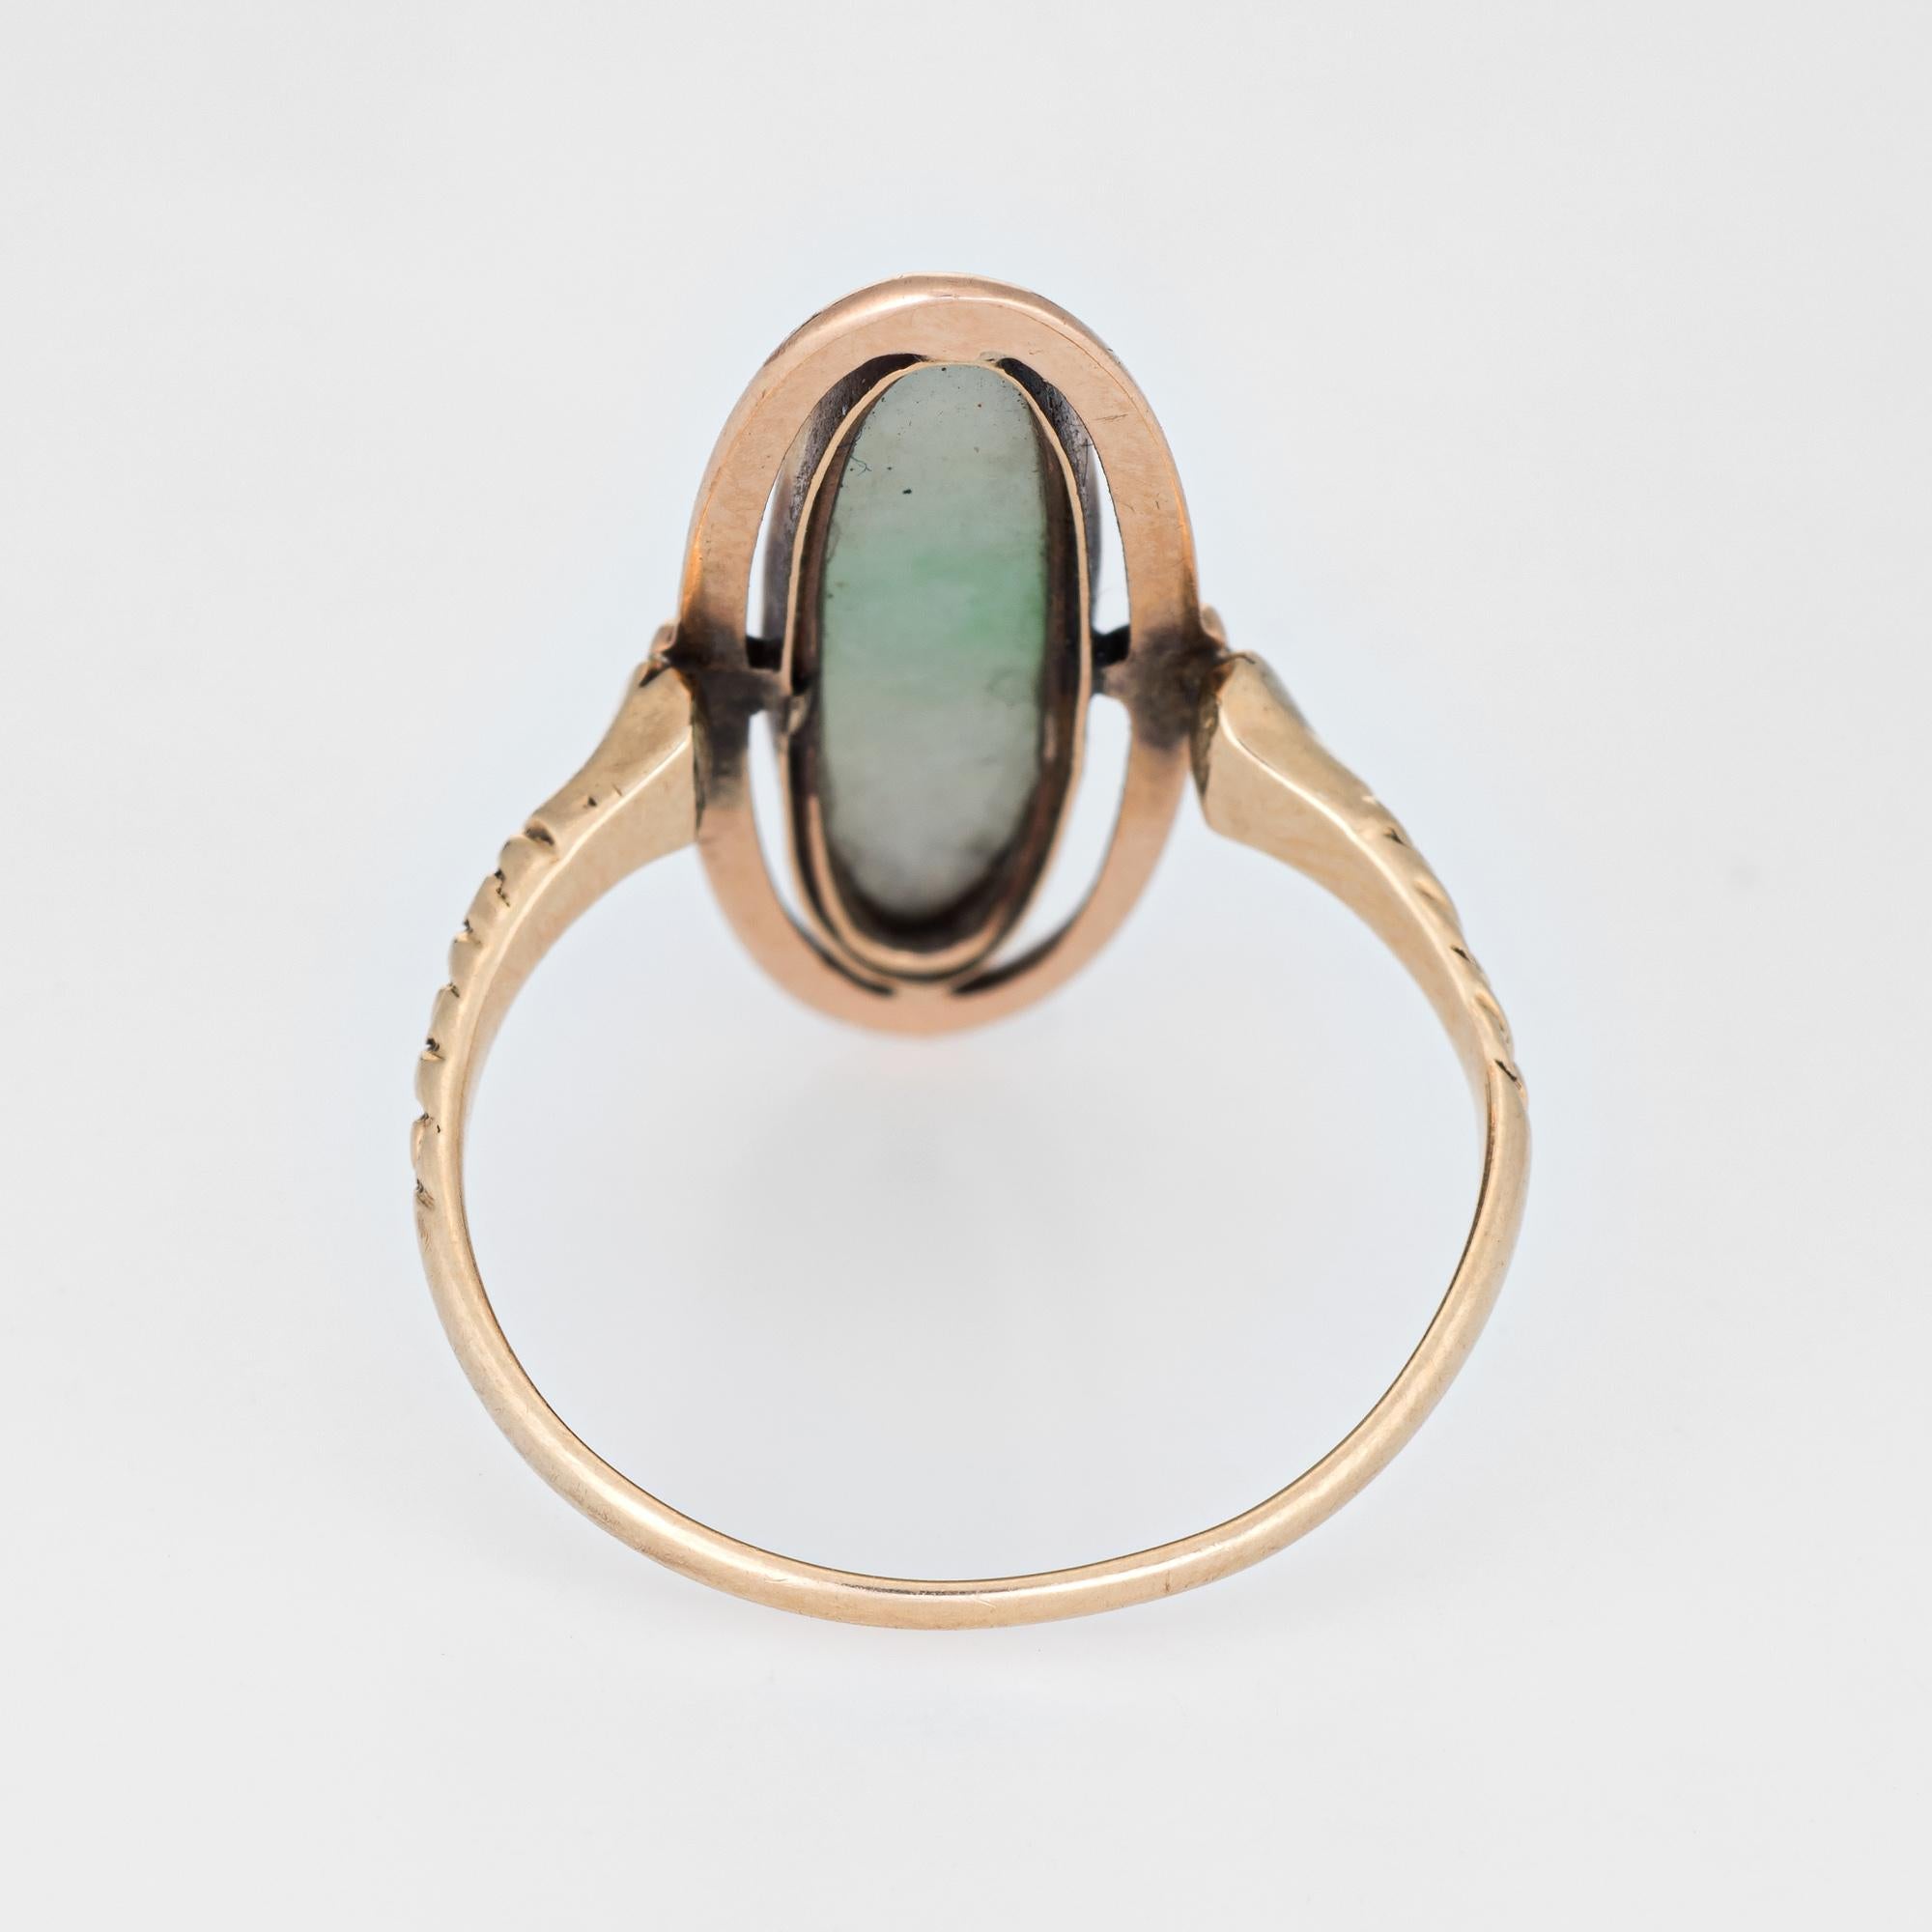 Cabochon Vintage Jade Ring 14k Yellow Gold Long Oval Estate Fine Jewelry Sz 8.5